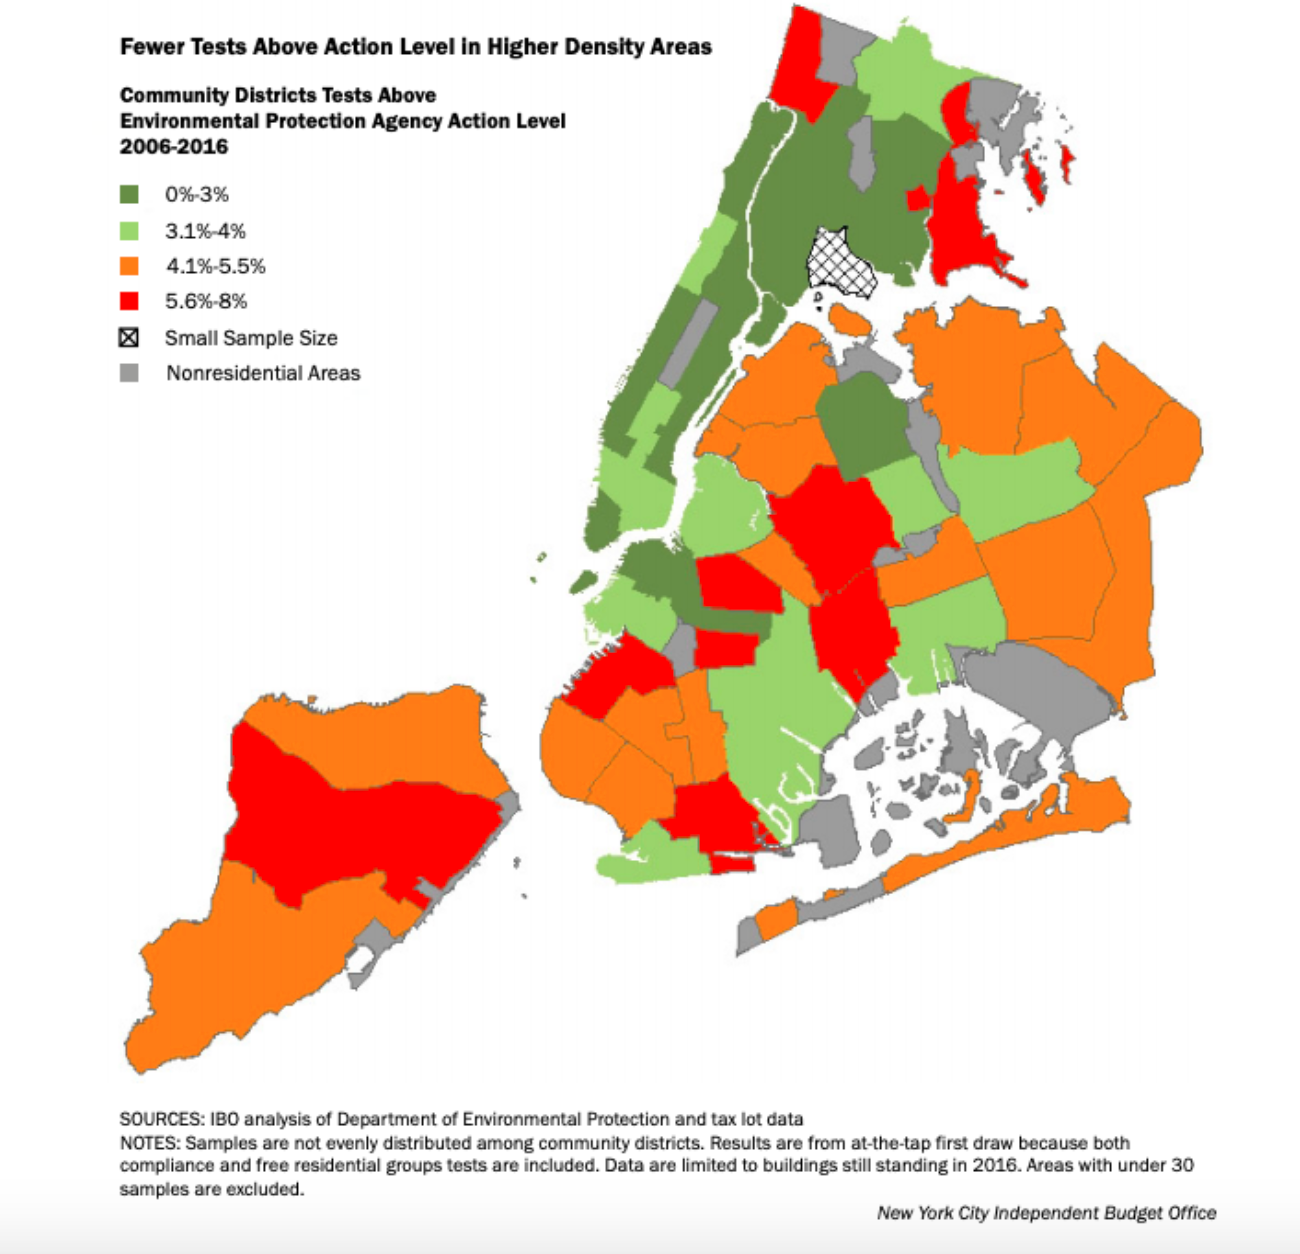 Lead service line risk in NYC (Source: NYC Independent Budget Office, 2018)